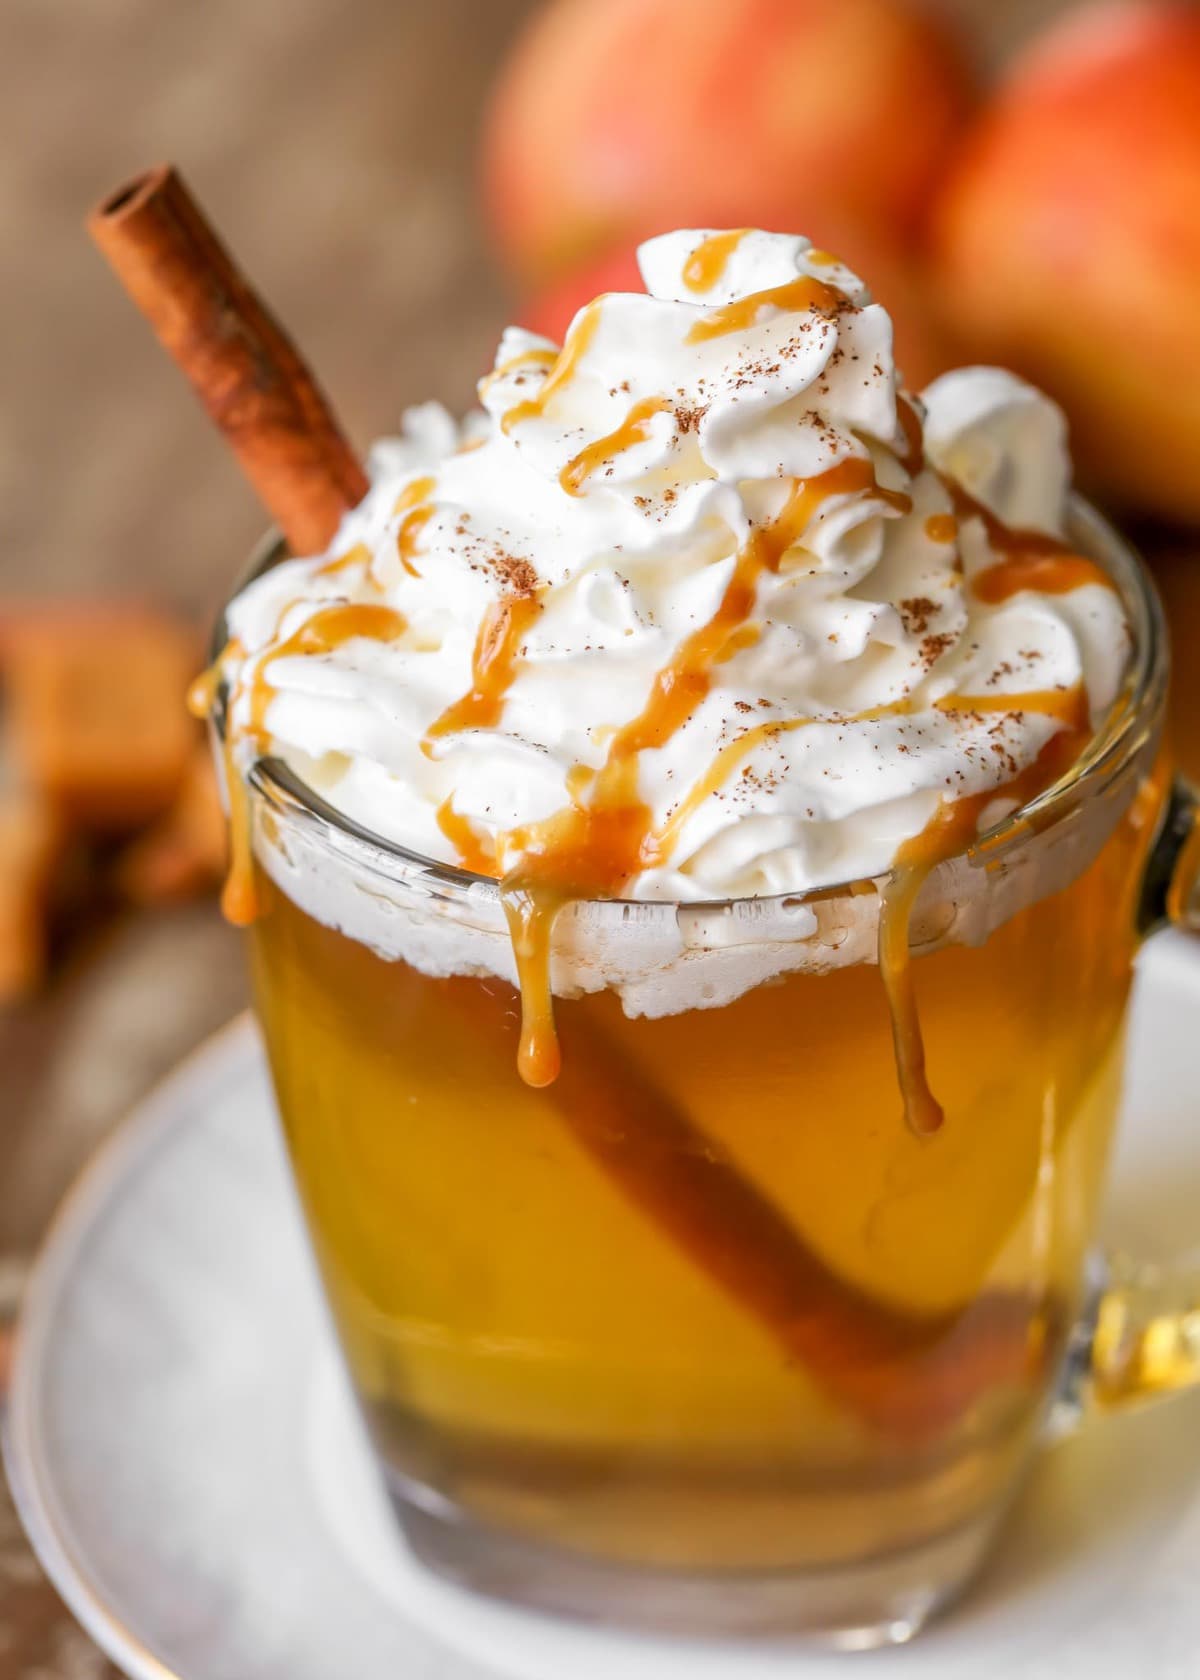 Non alcoholic drinks - caramel apple cider topped with whipped cream and caramel.